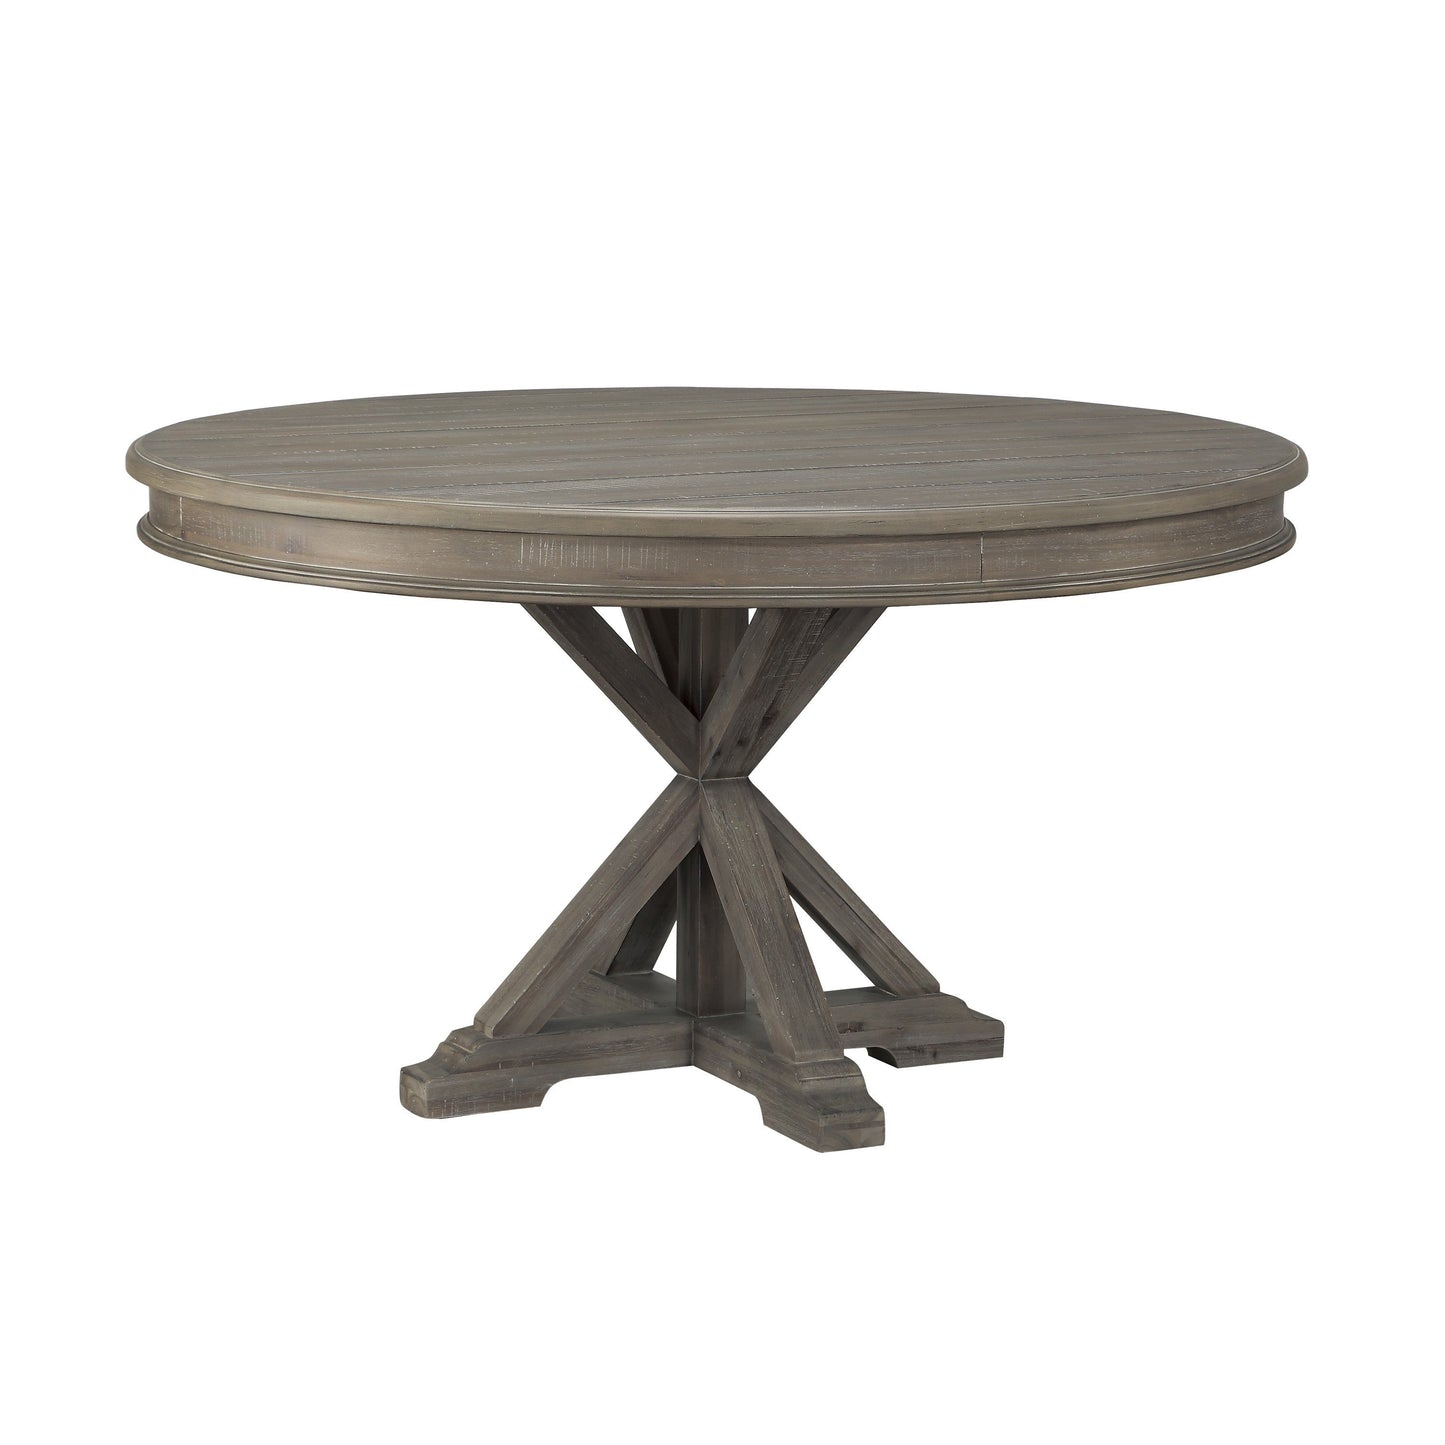 Cardano Driftwood Light Brown Round Dining Table